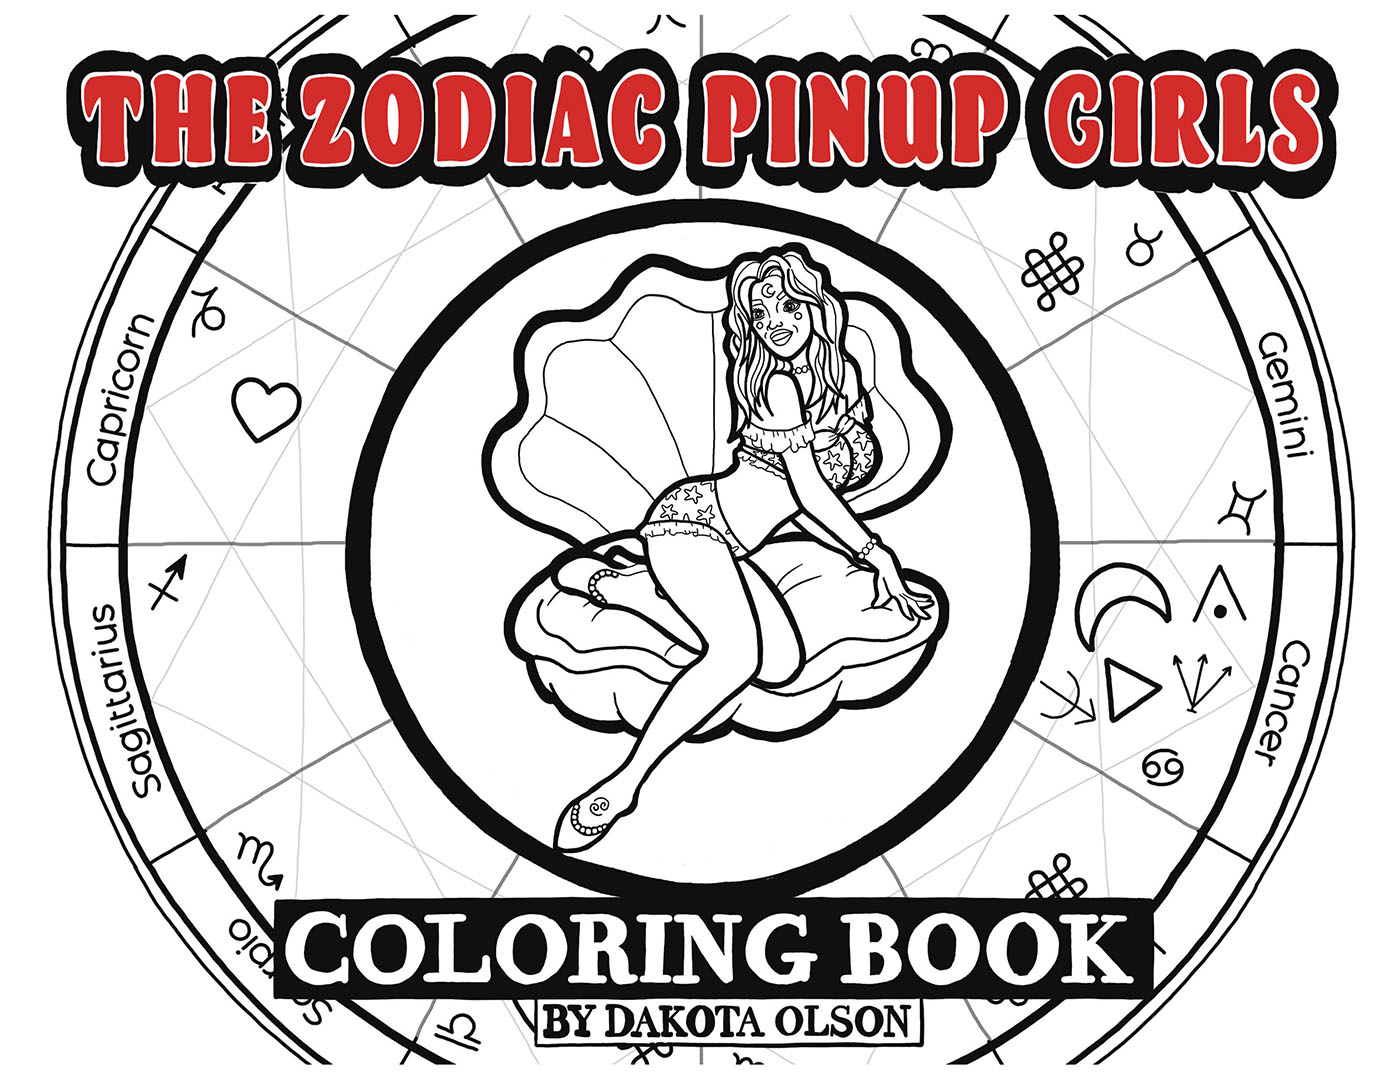 Dakota Olson’s New Book, “The Zodiac Pinup Girls: Coloring Book,” is a Series of Illustrations Depicting Twelve Beautiful Girls Waiting to be Brought to Life with Color